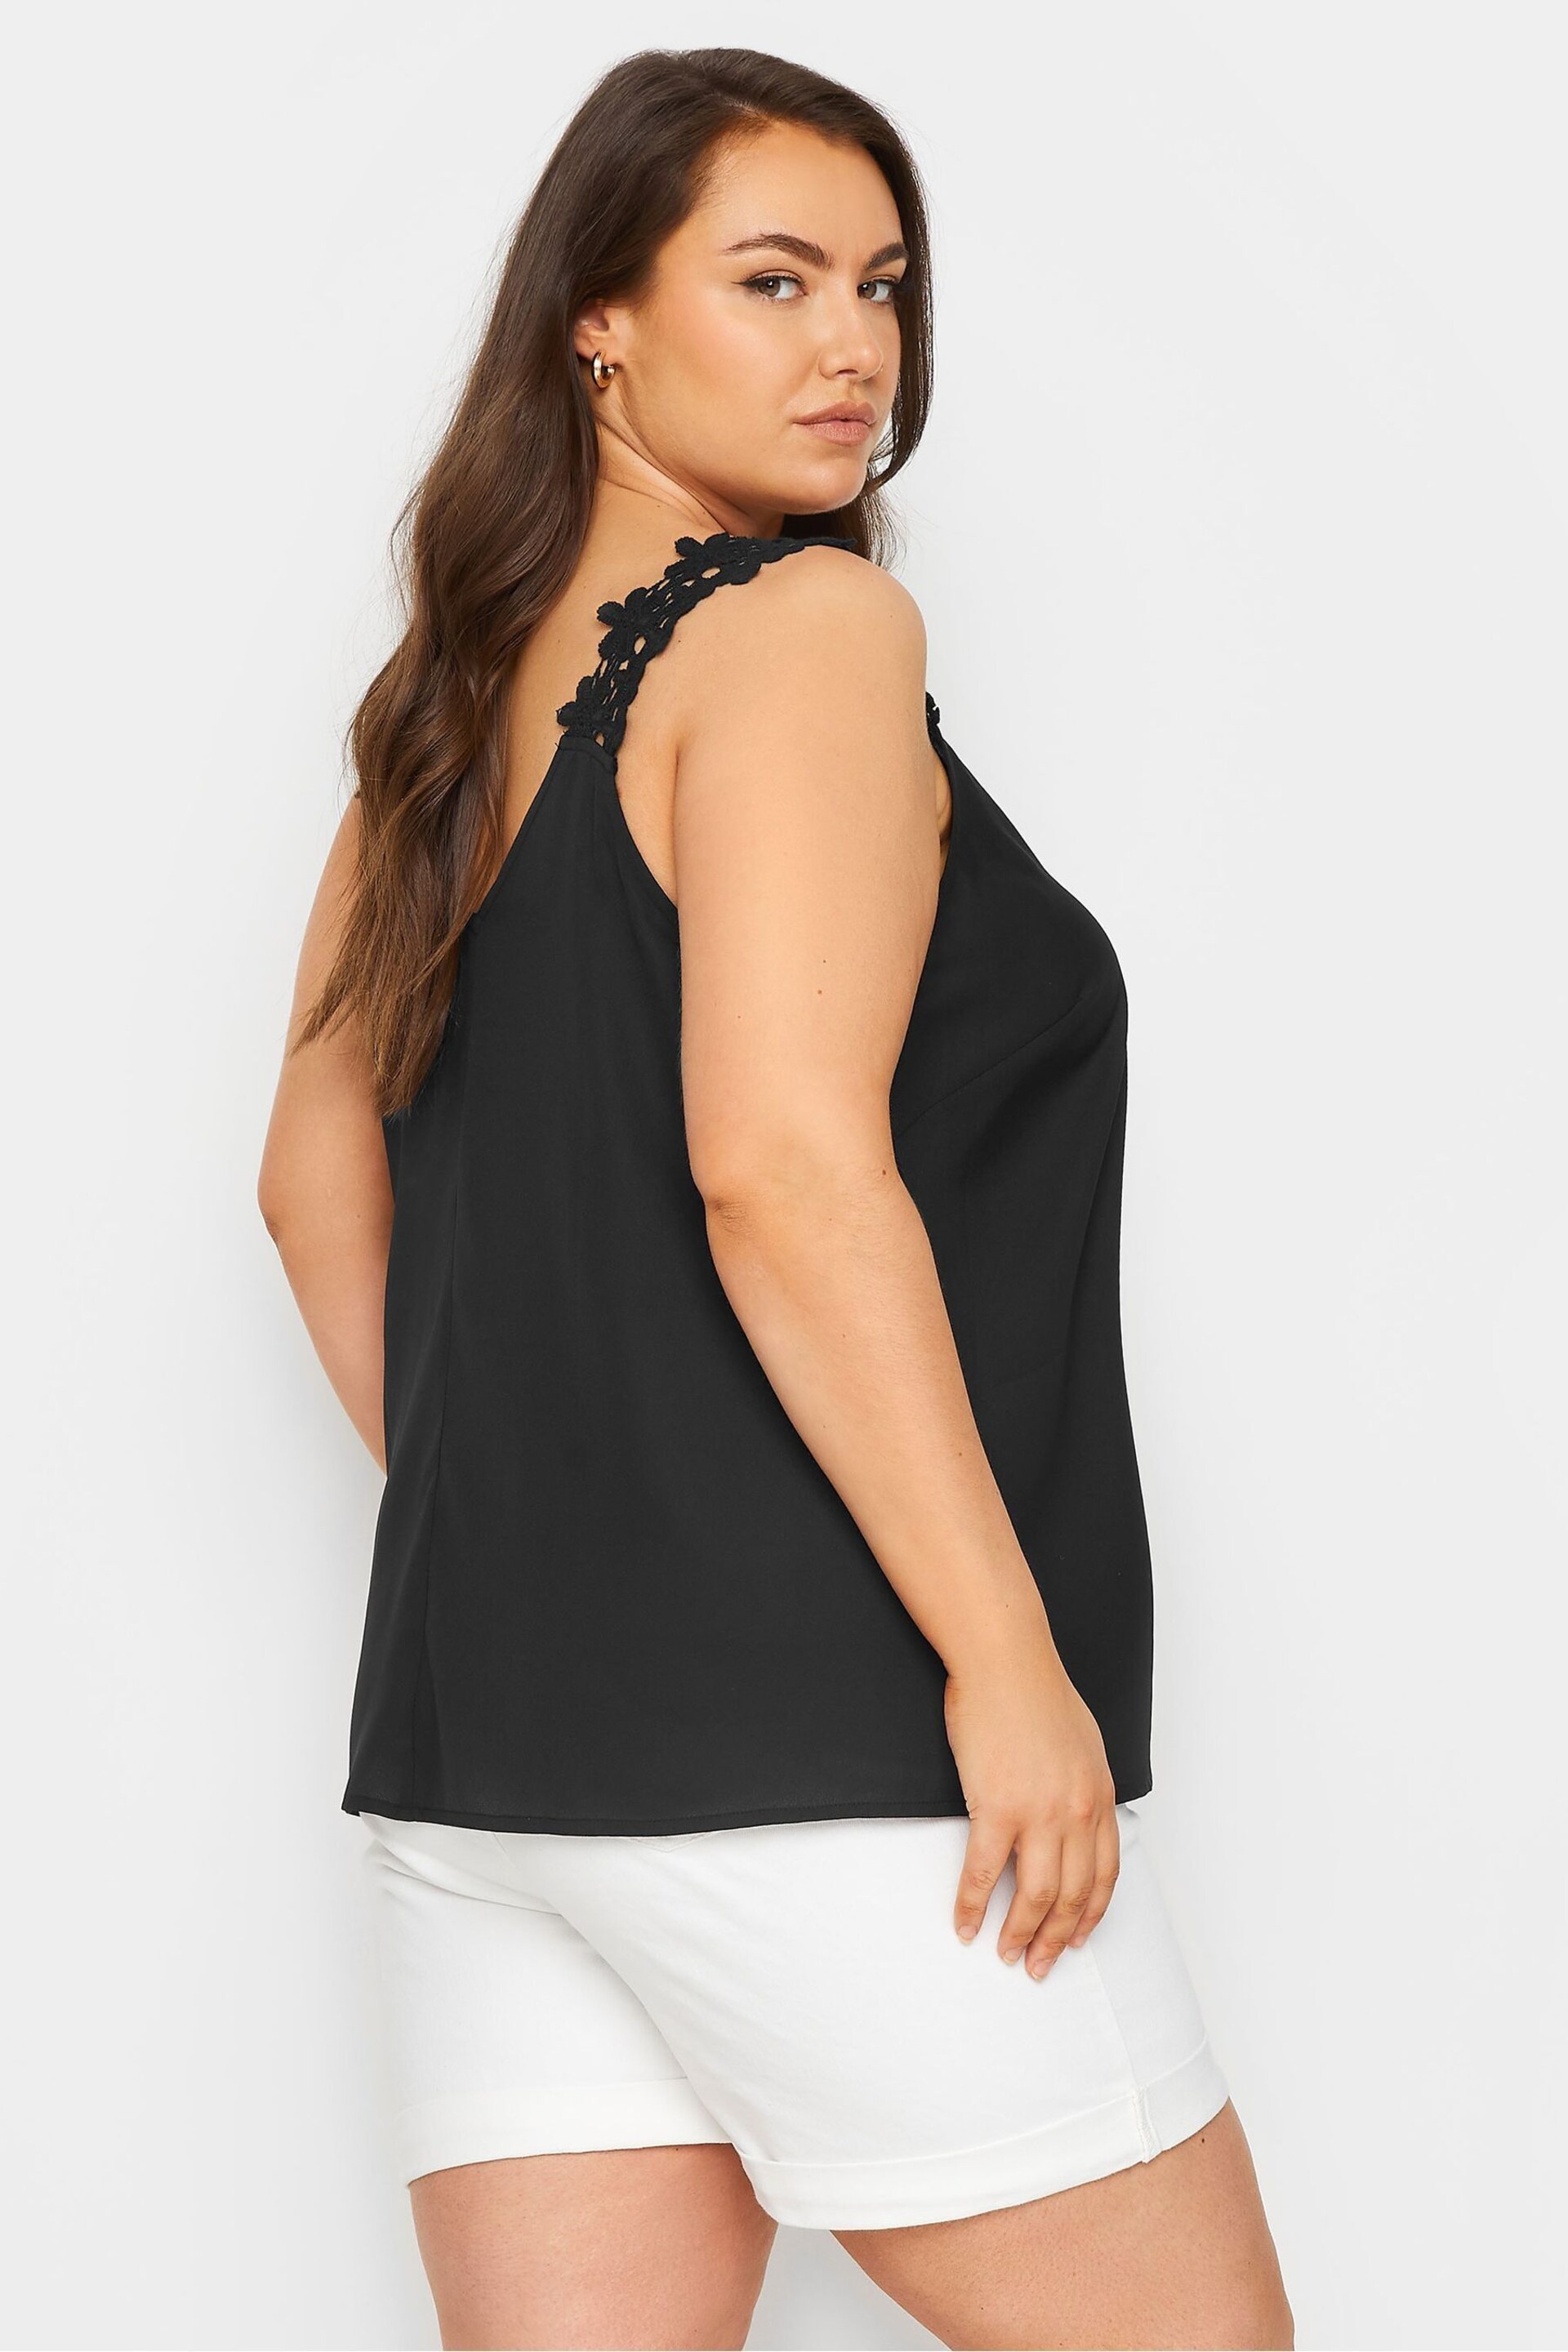 Yours Curve Black Trim Cami - Image 3 of 5